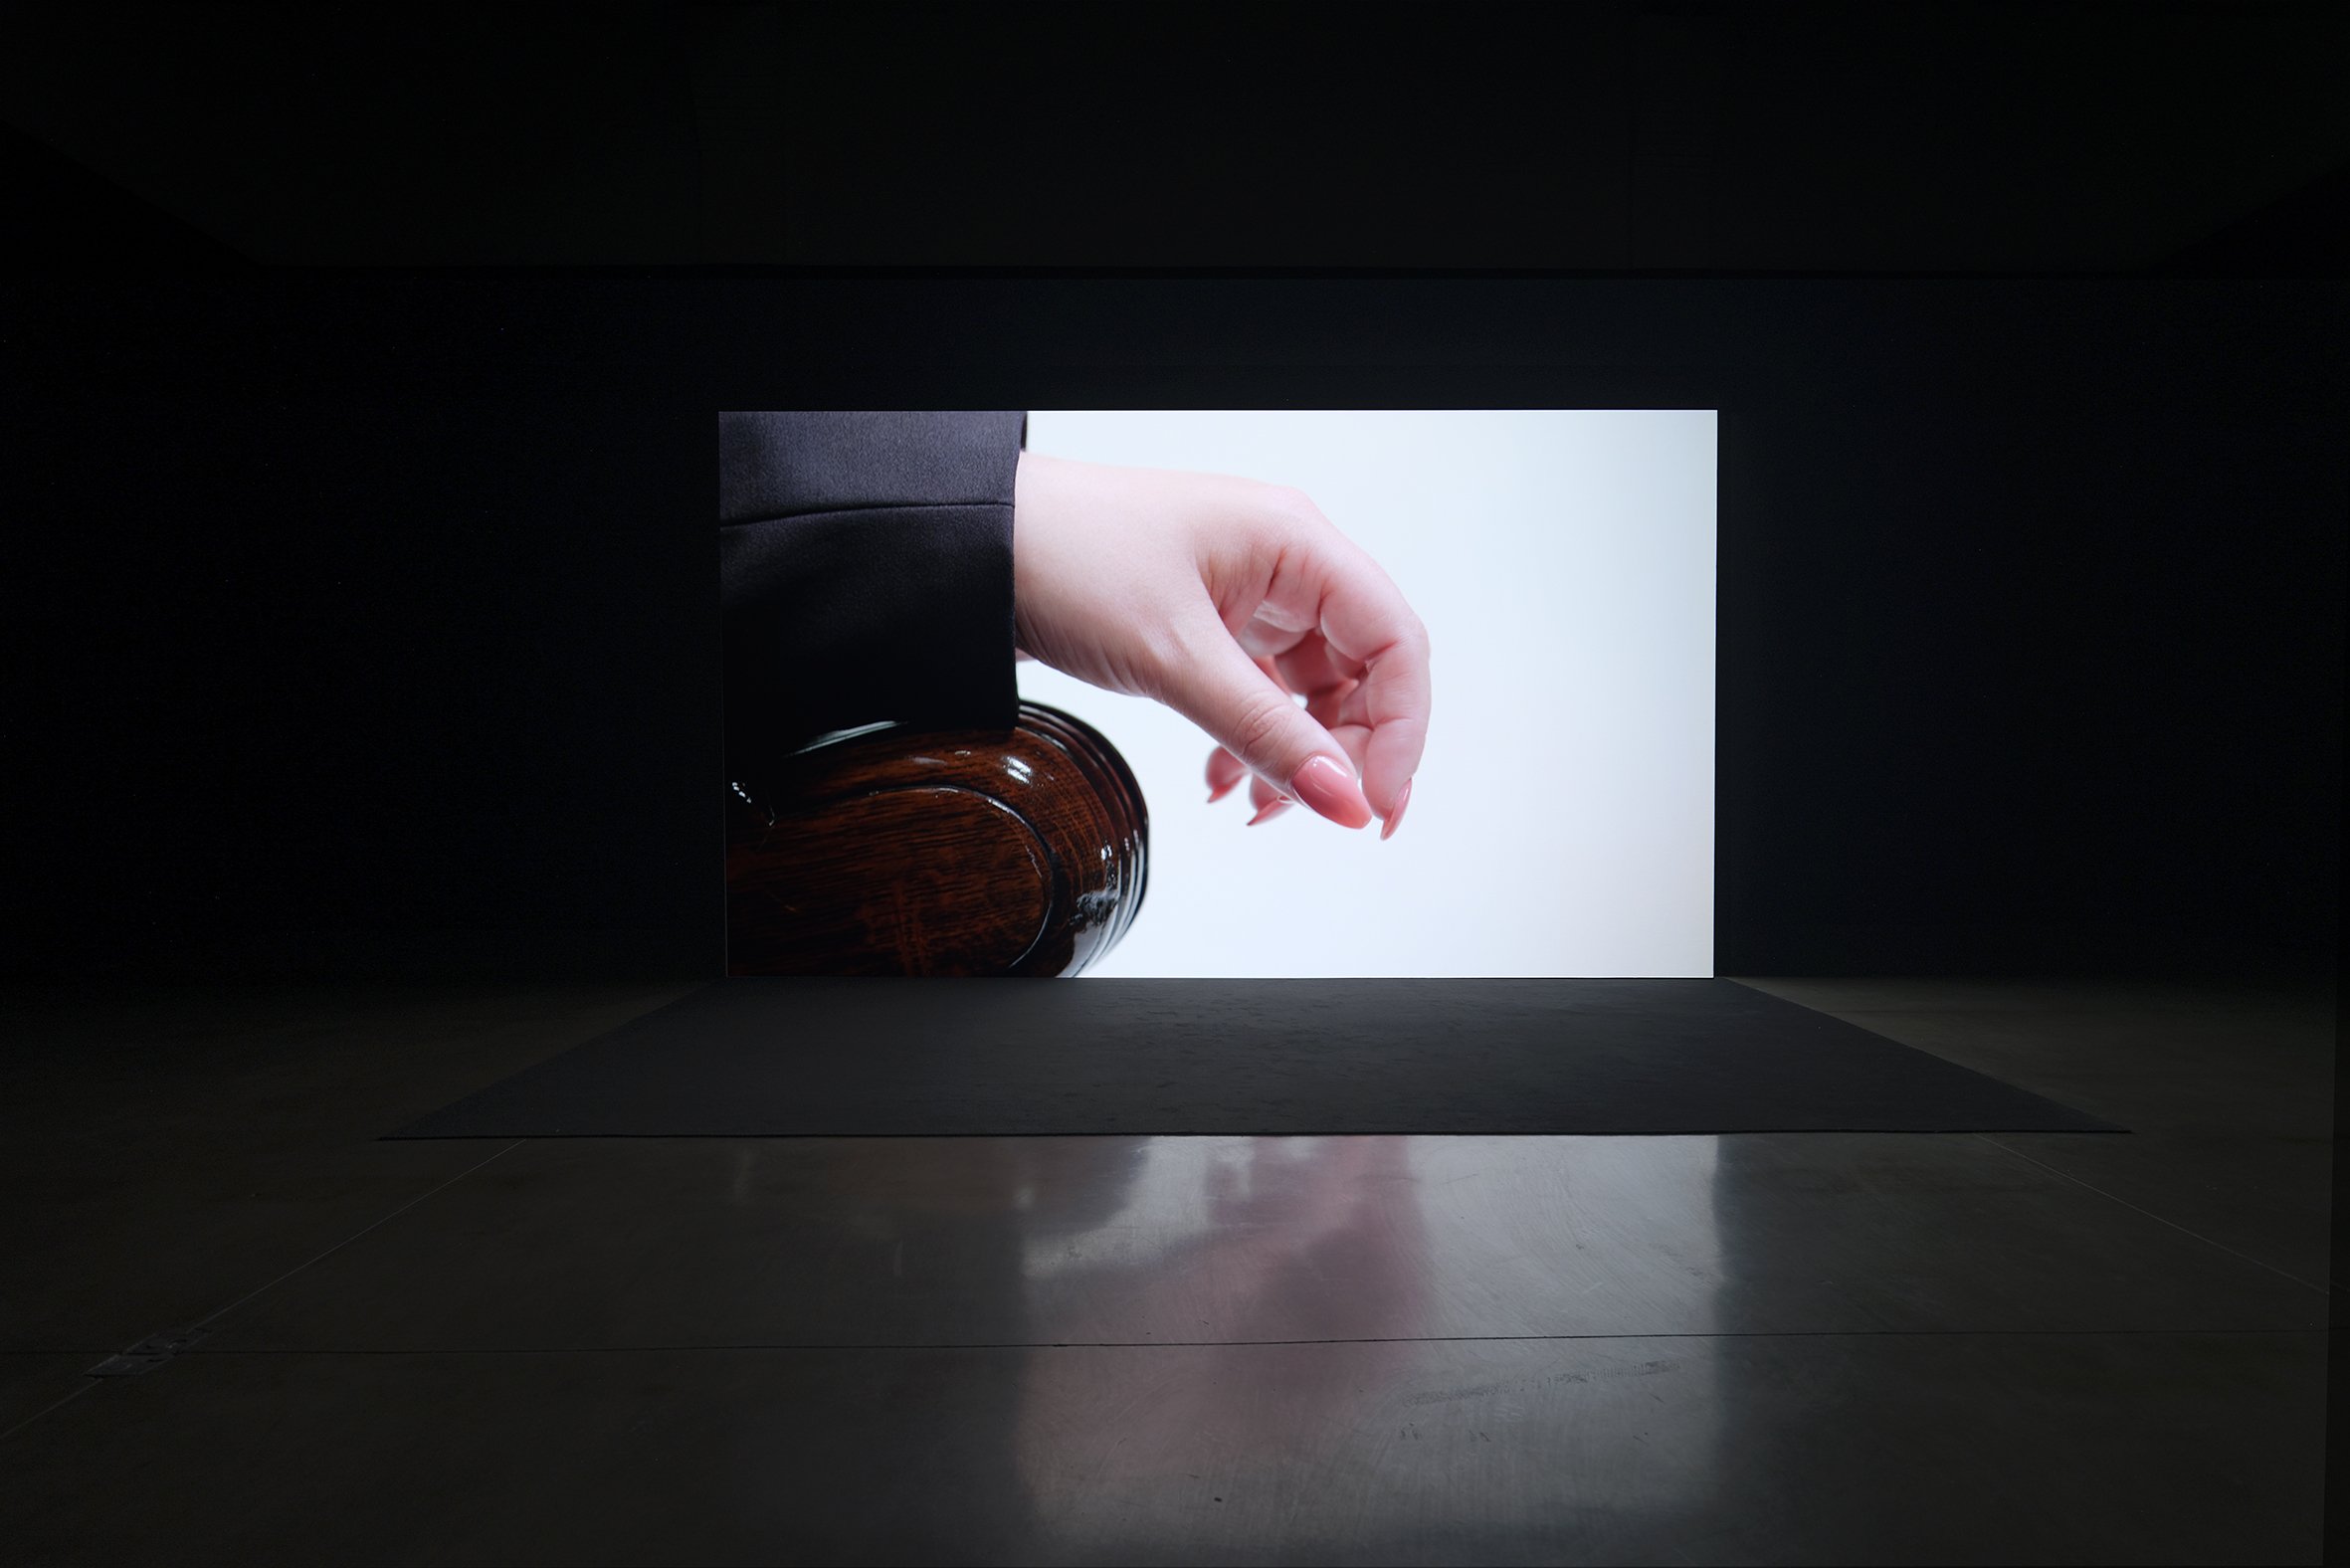  ‘Appearance’, Carey Young, 2023, video installation. Installation view at Paula Cooper Gallery. Photo: Carey Young 